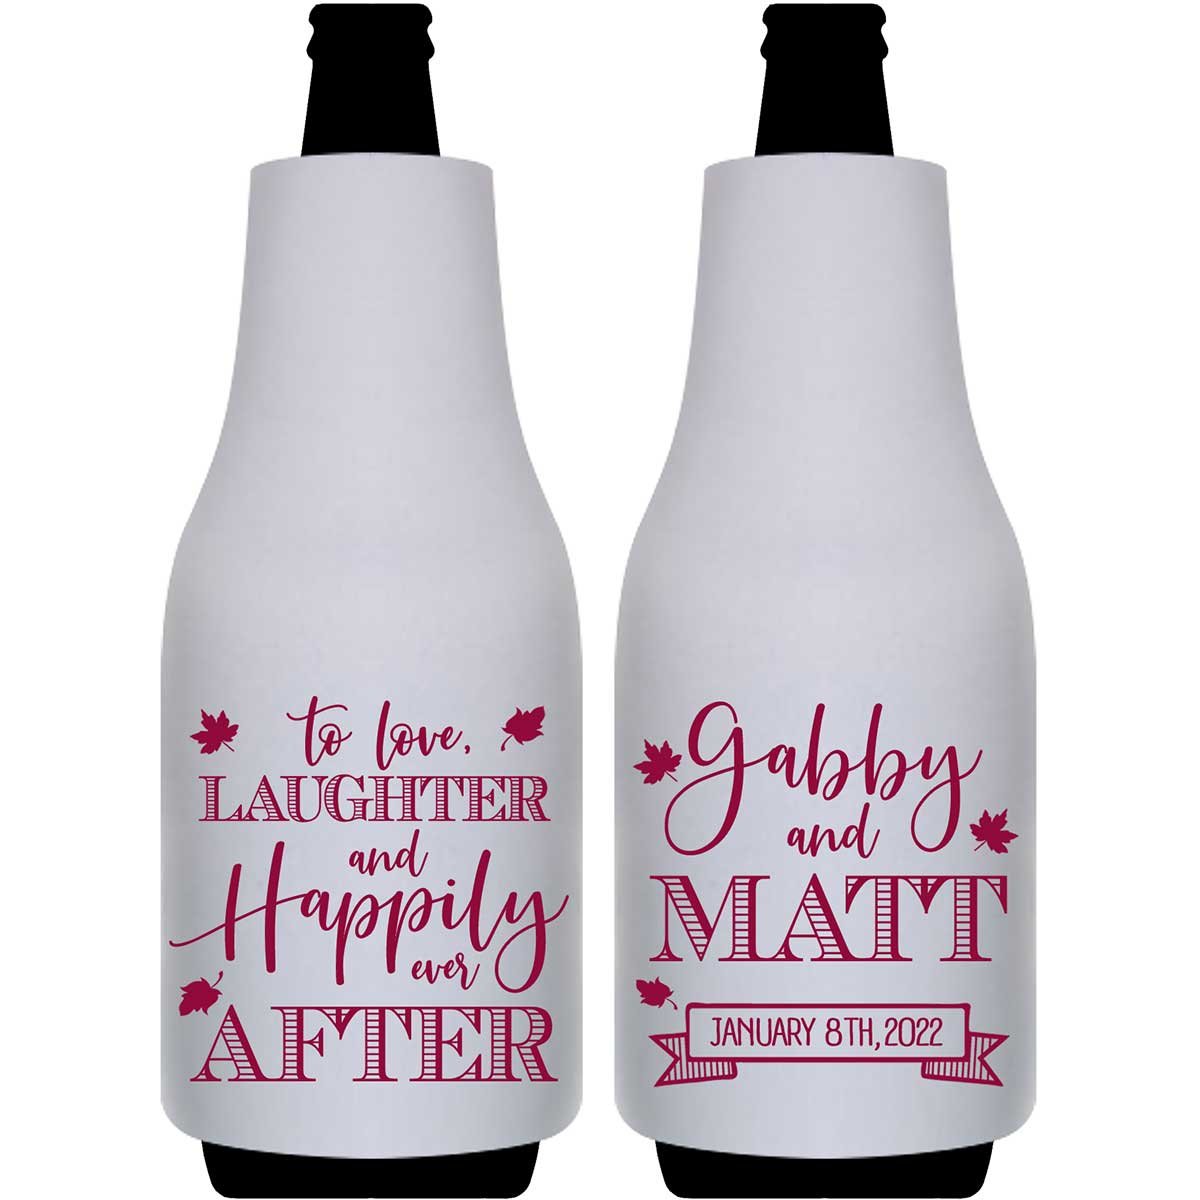 To Love Laughter & Happily Ever After 3C Foldable Bottle Sleeve Koozies Wedding Gifts for Guests